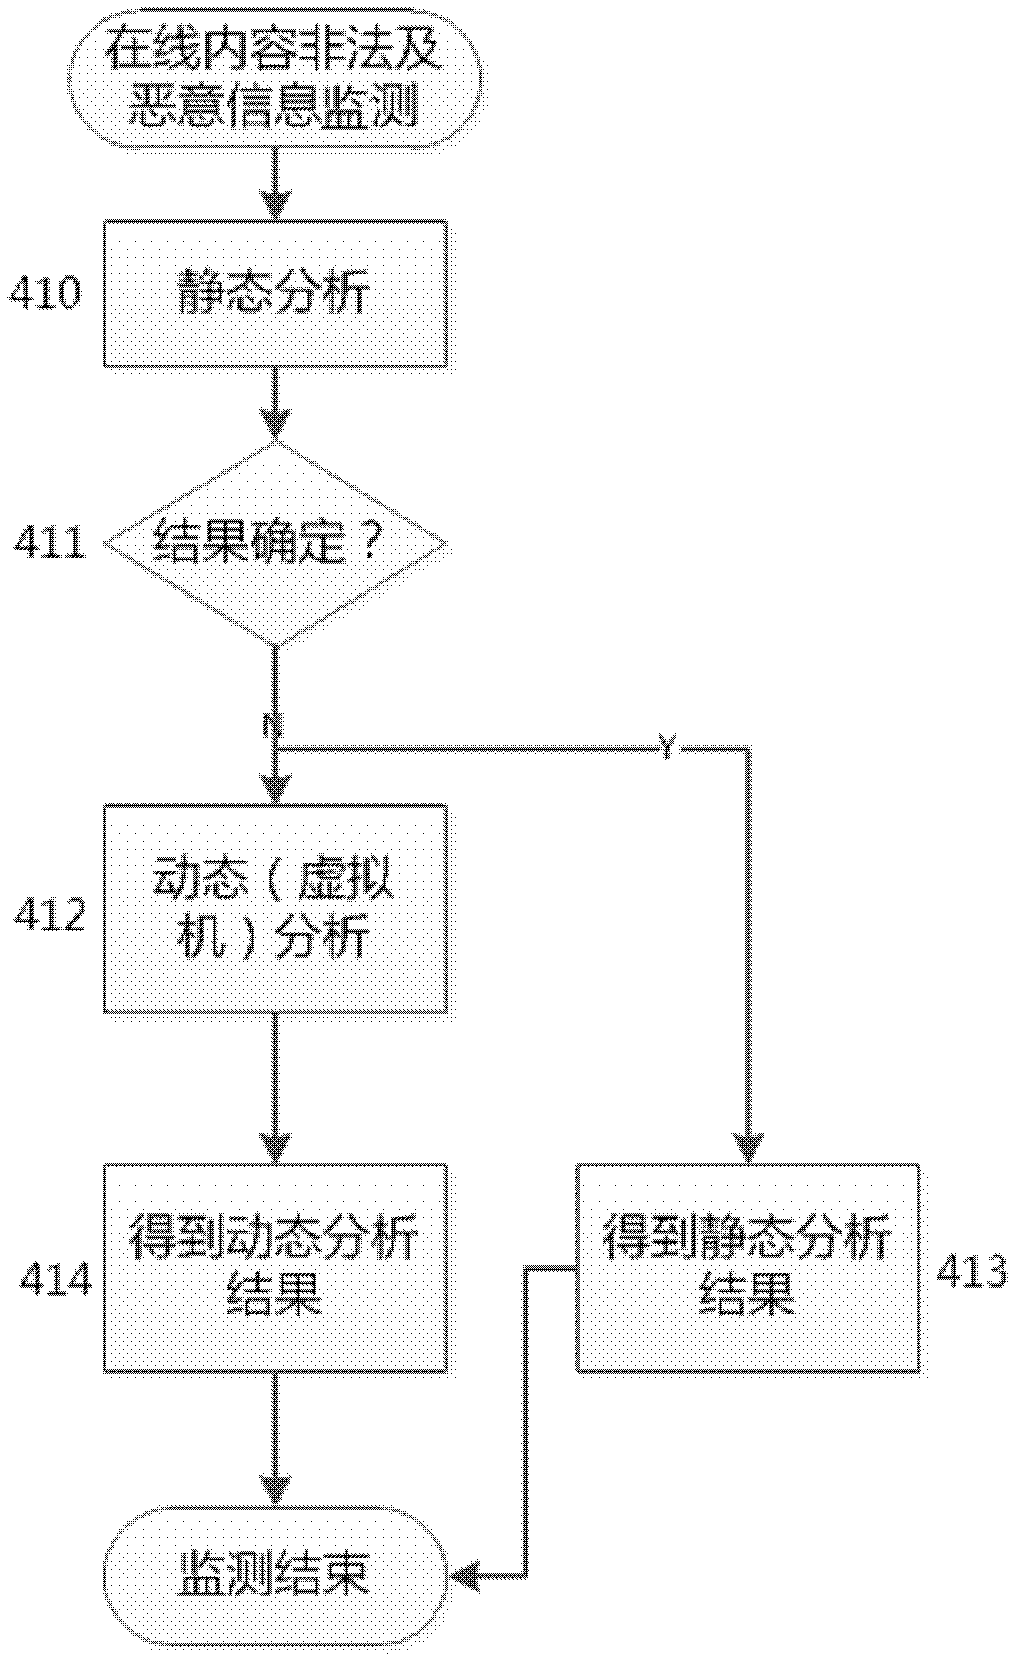 Online service abnormity monitoring method and monitoring system thereof